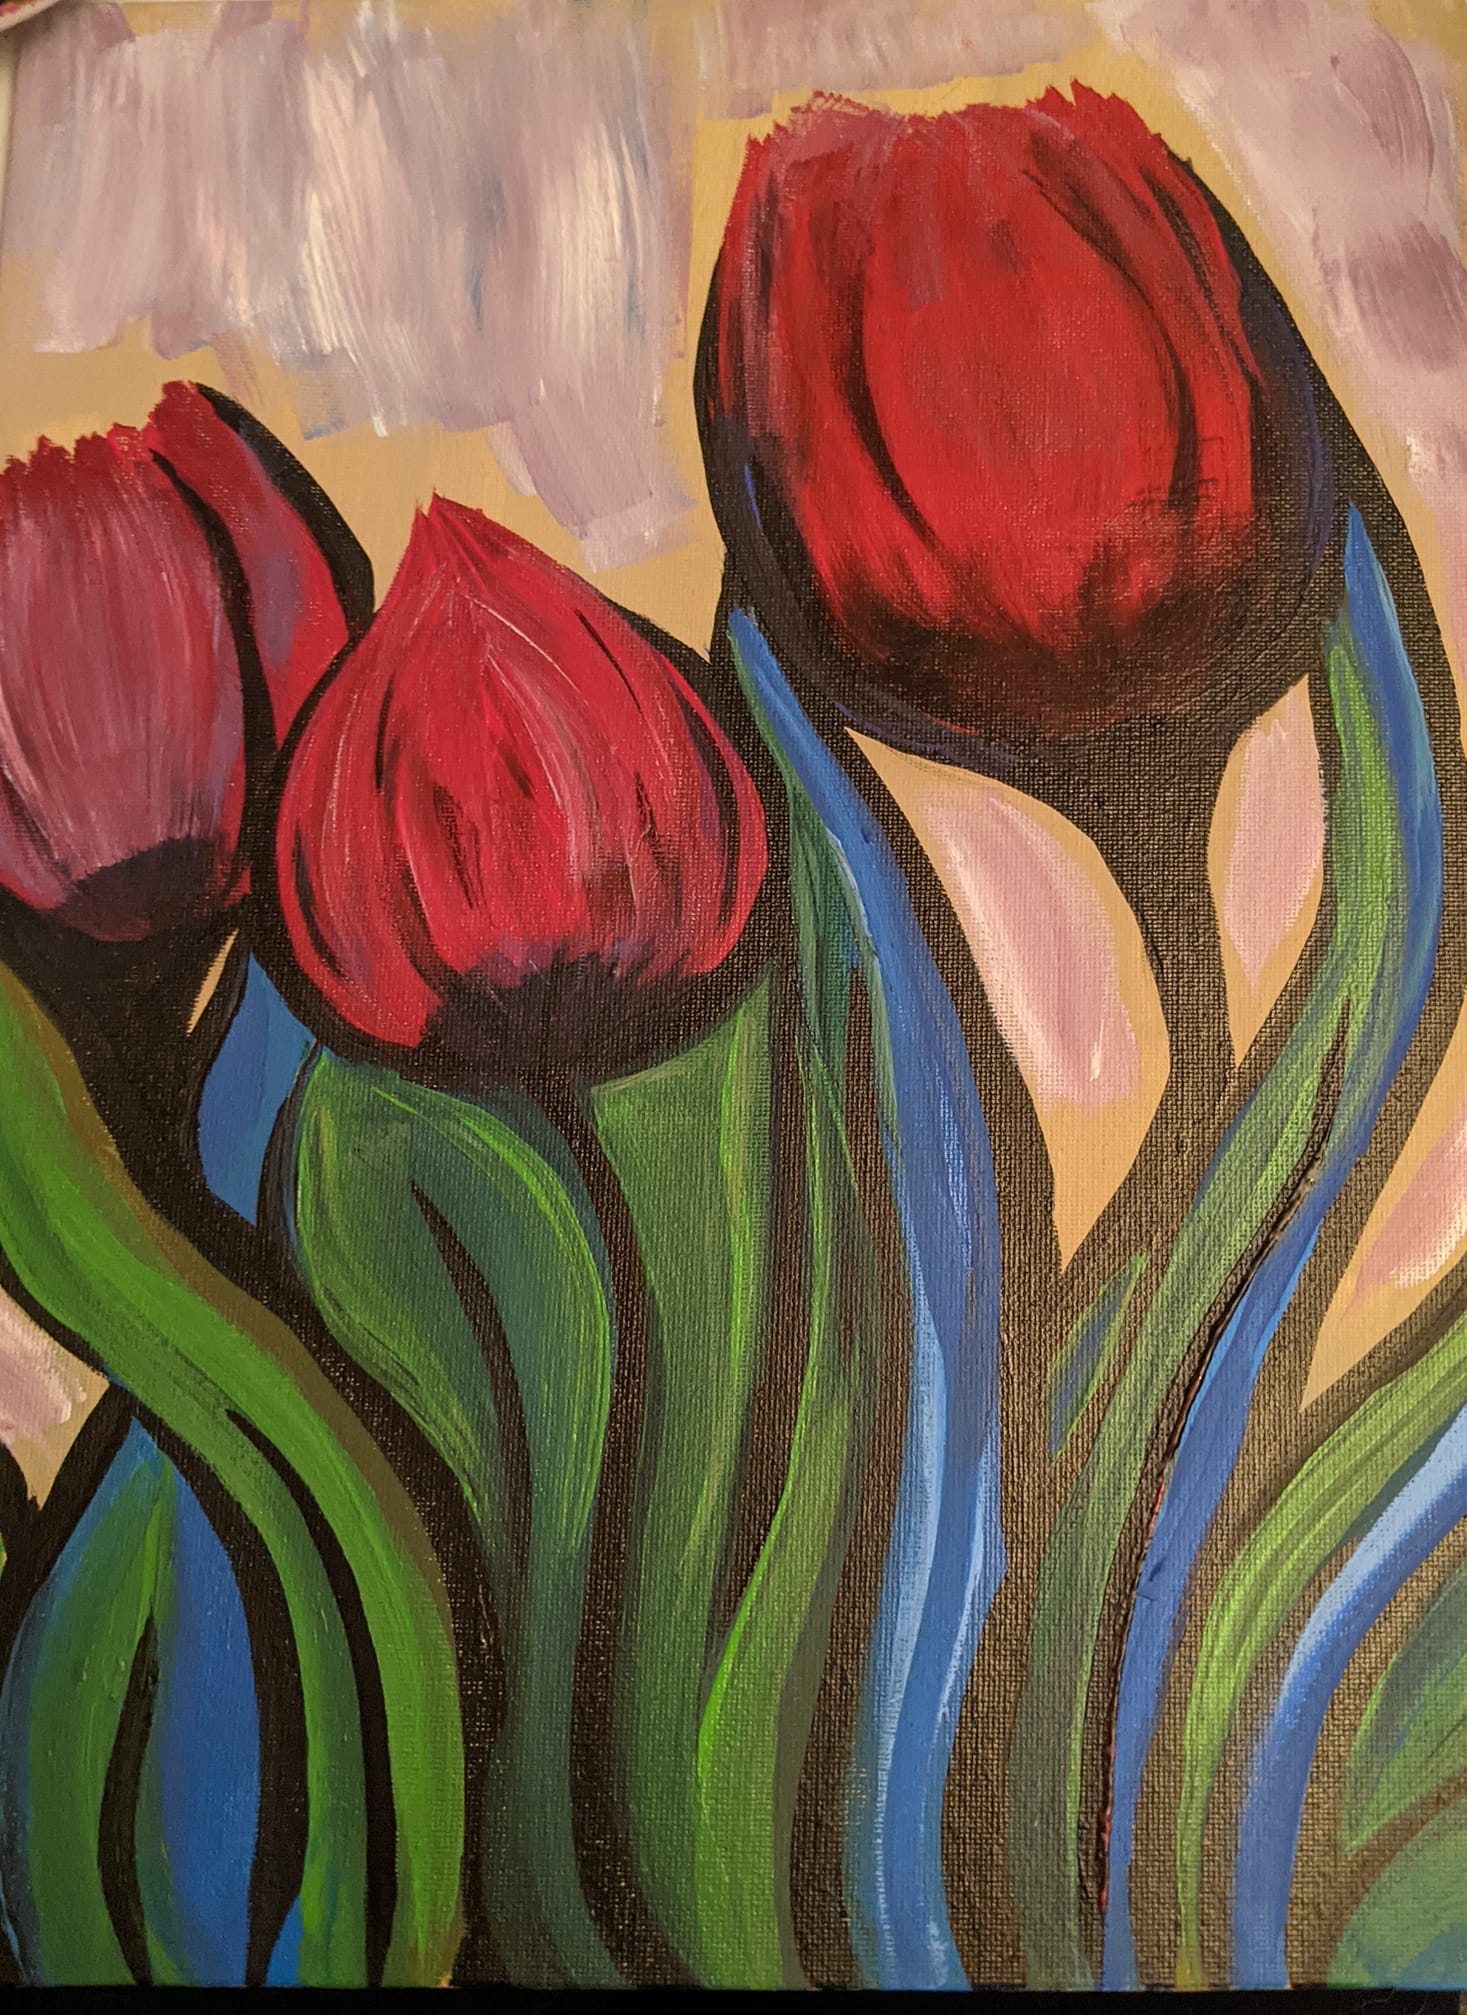 2nd Painting - Painting Night benefiting Harbor Hospice Foundation - April 13